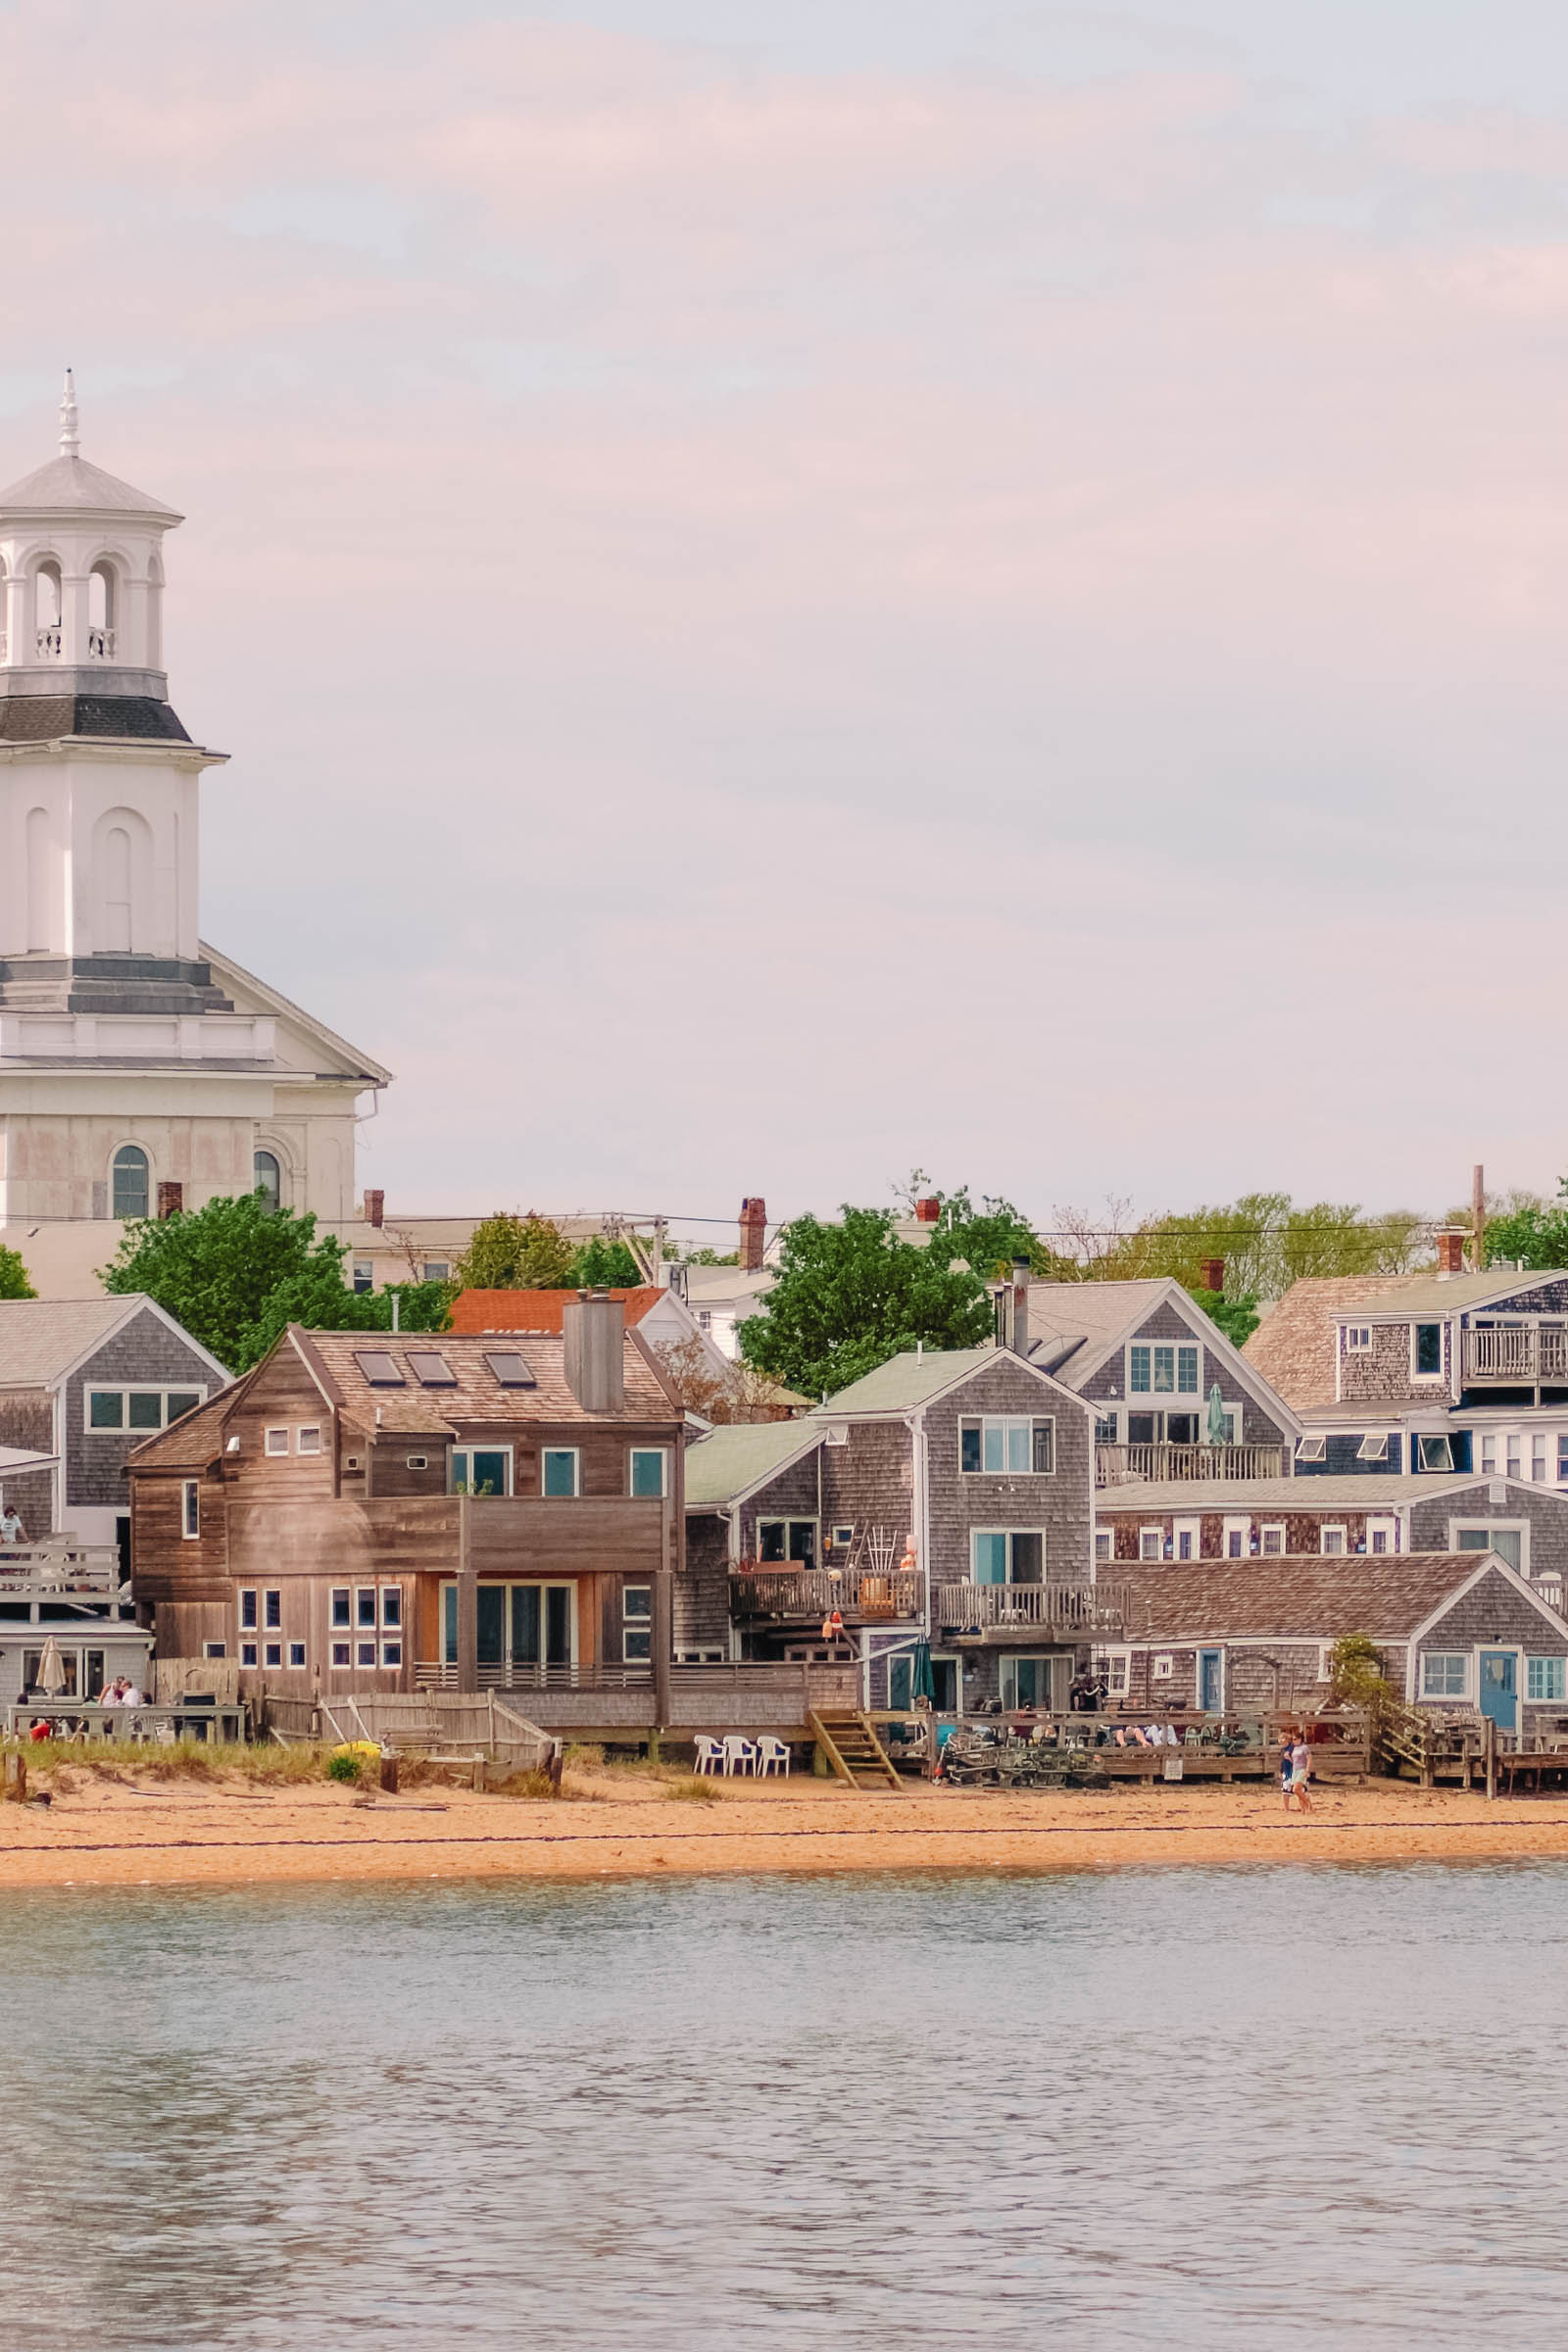 19 Best Things to Do in Cape Cod